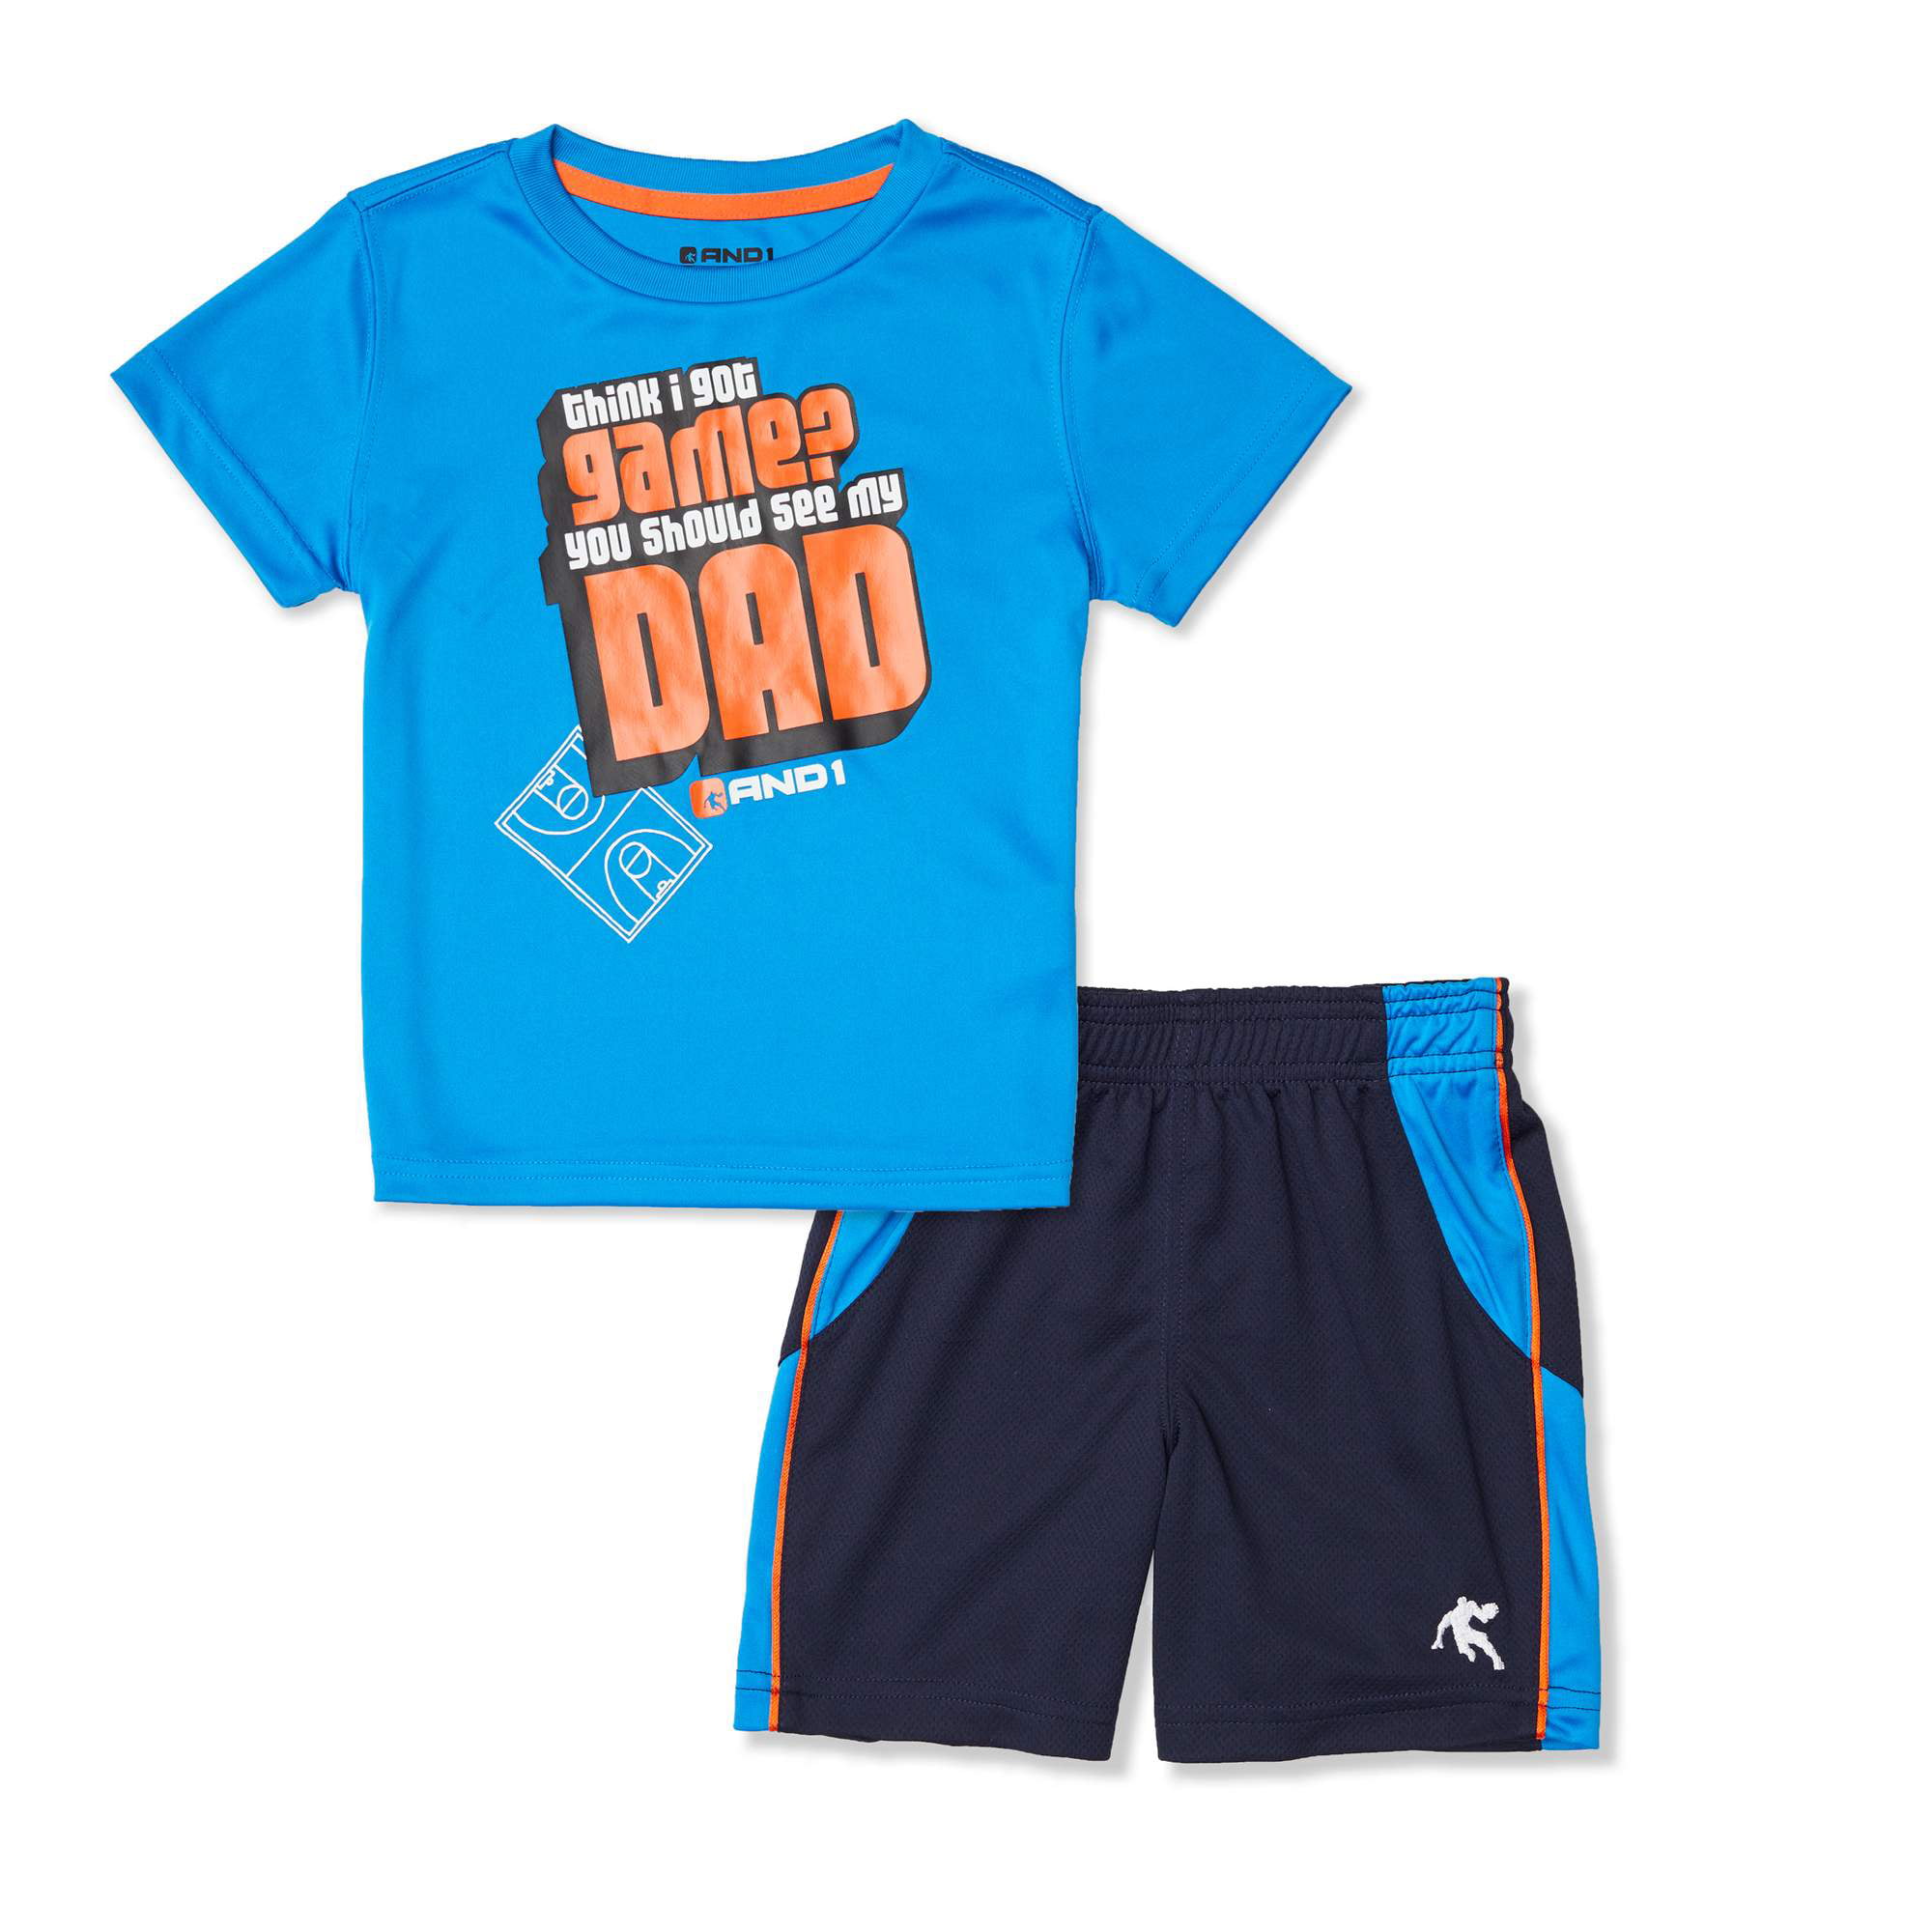 AND1 - Toddler Boy Graphic T-shirt & Jersey Shorts, 2pc Active Outfit ...